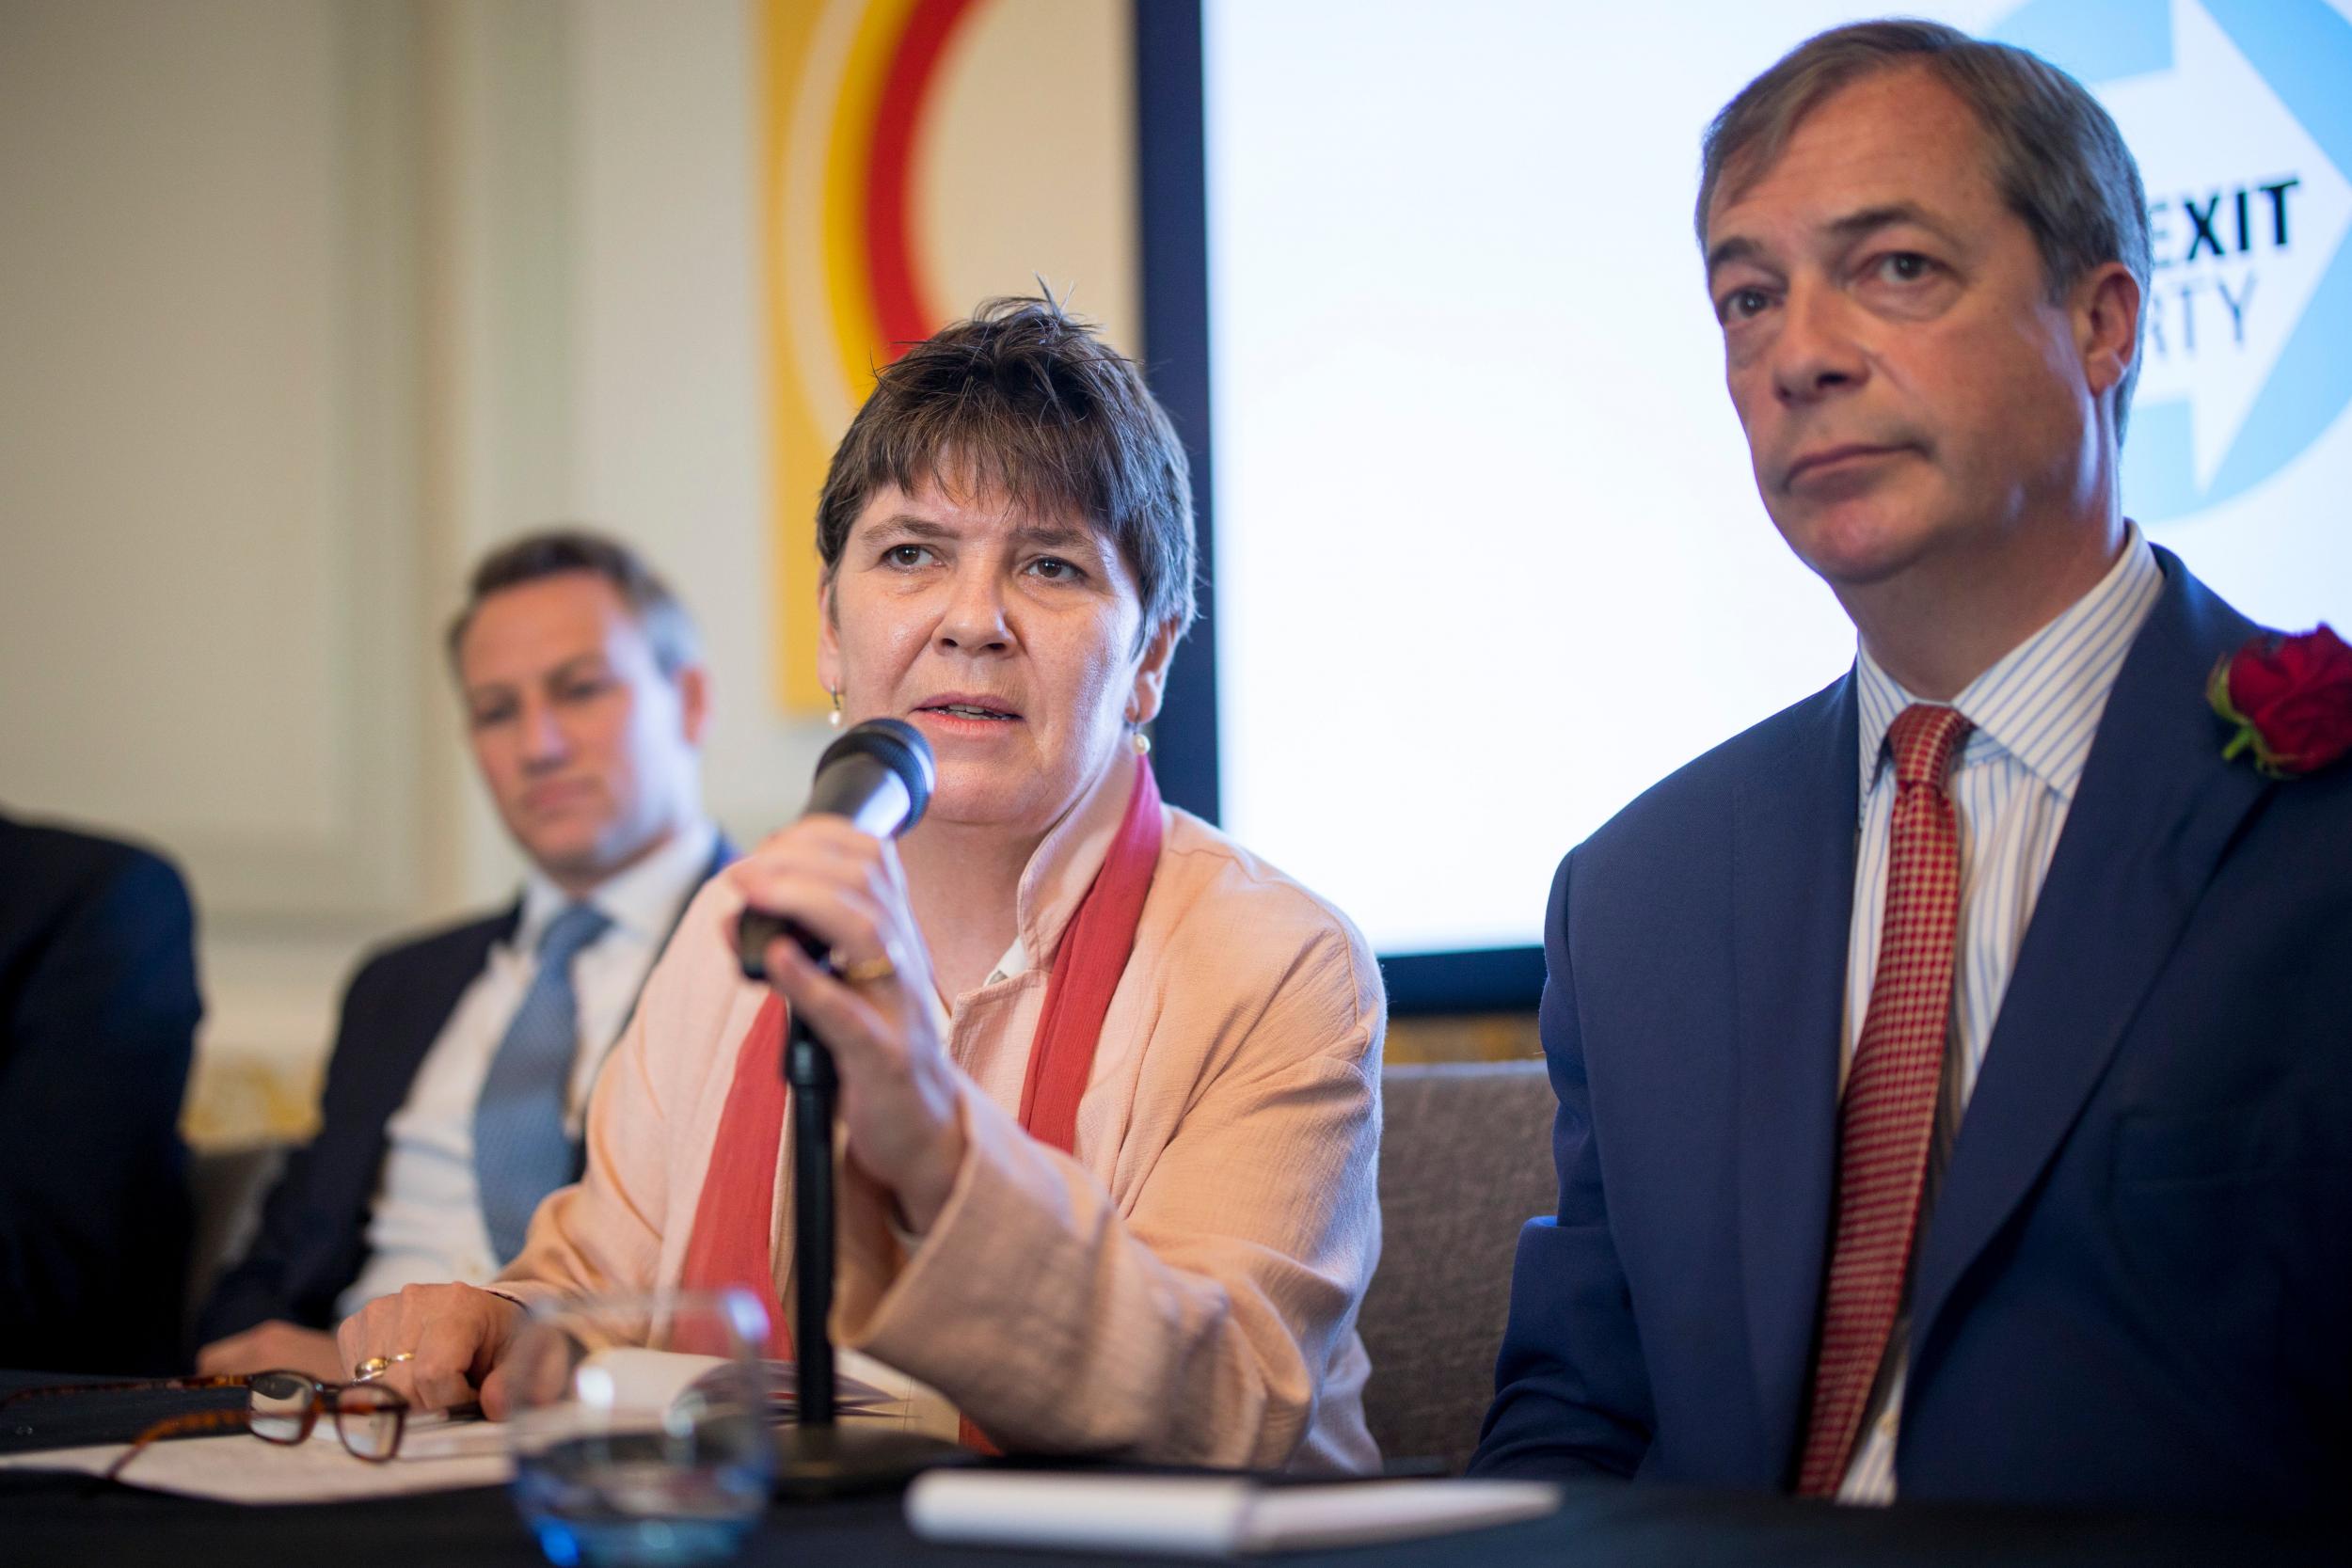 Claire Fox with Nigel Farage